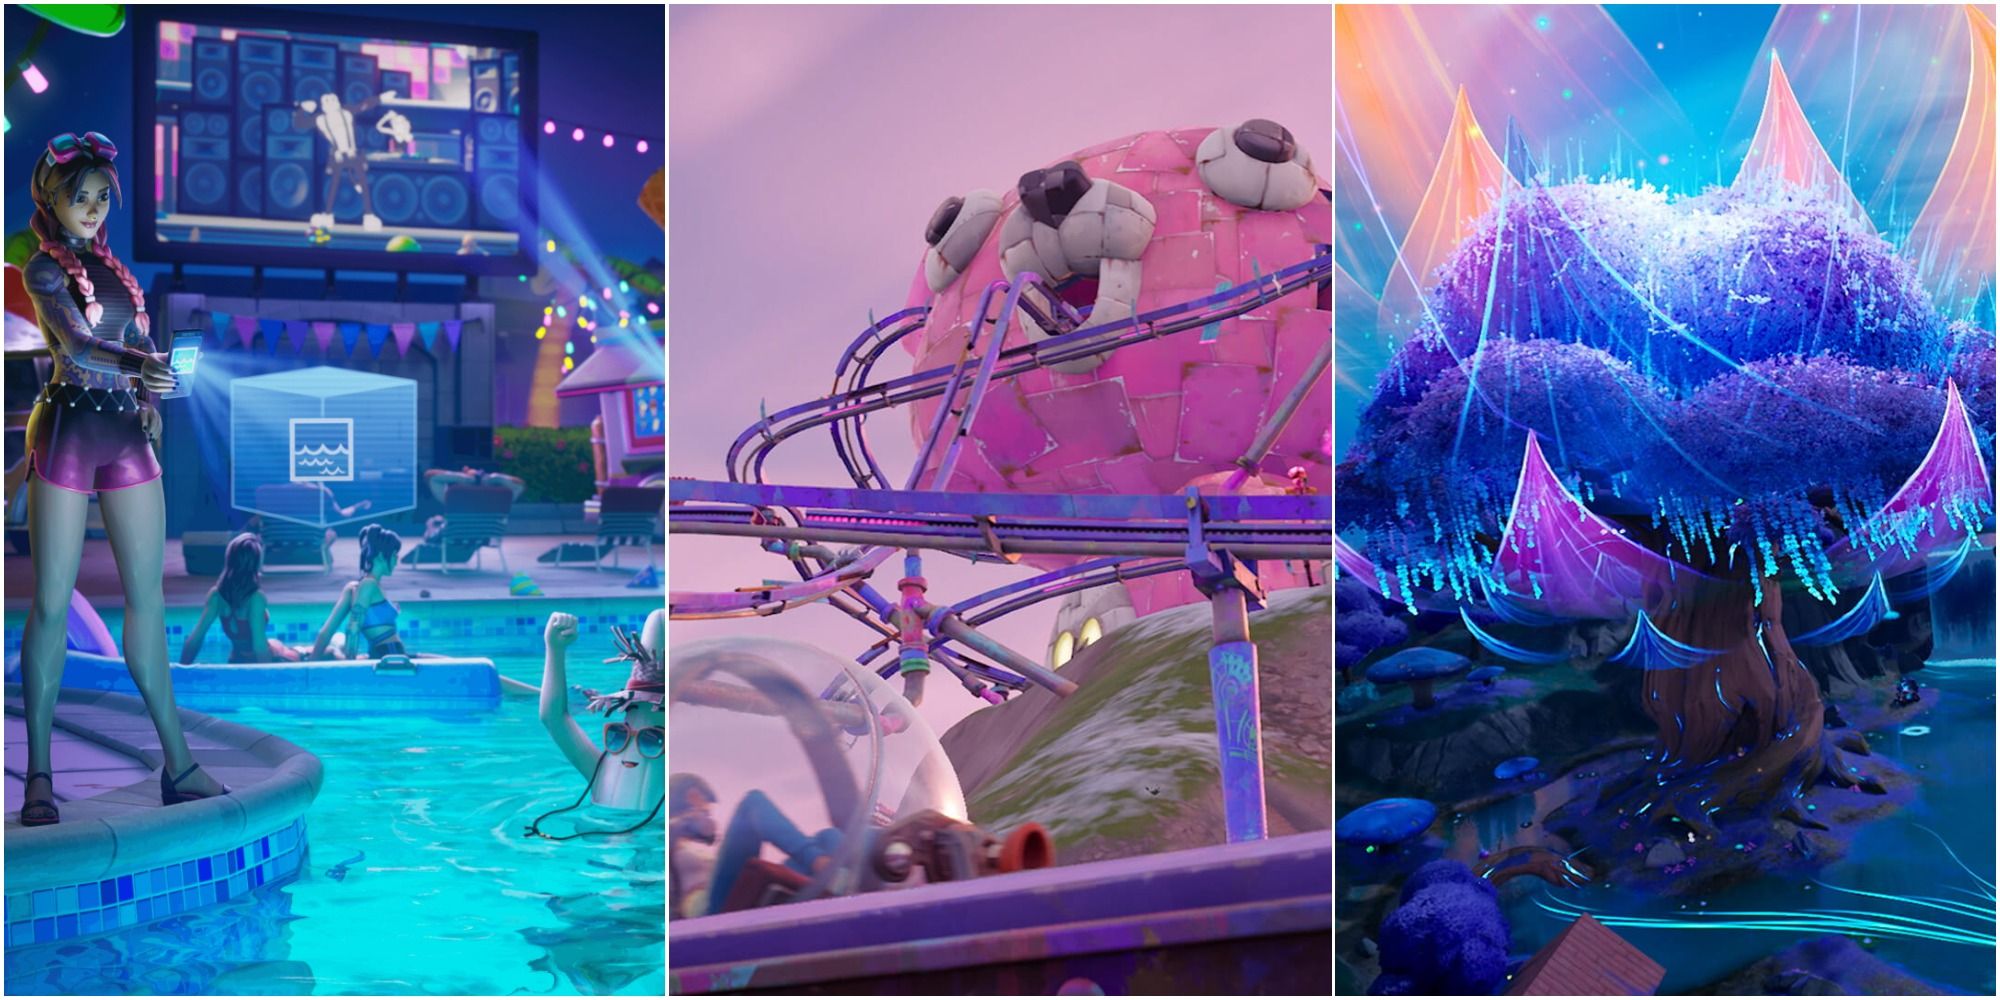 A Split Image of Fortnite Chapter 3 Season 3, Vibin' with characters by the pool and riding a rollercoaster.